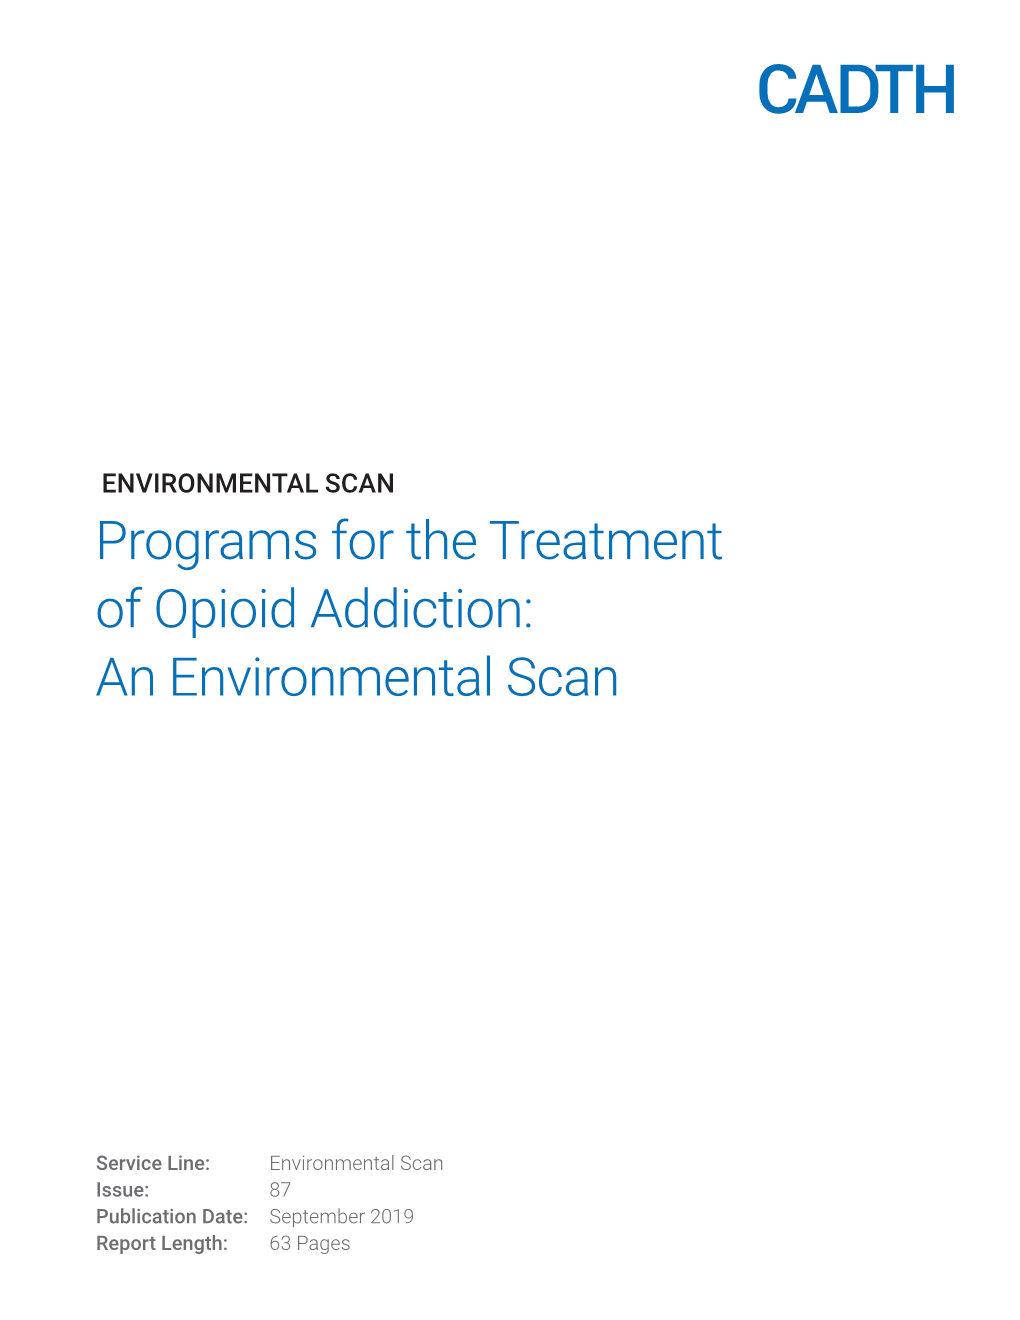 Programs for the Treatment of Opioid Addiction: an Environmental Scan